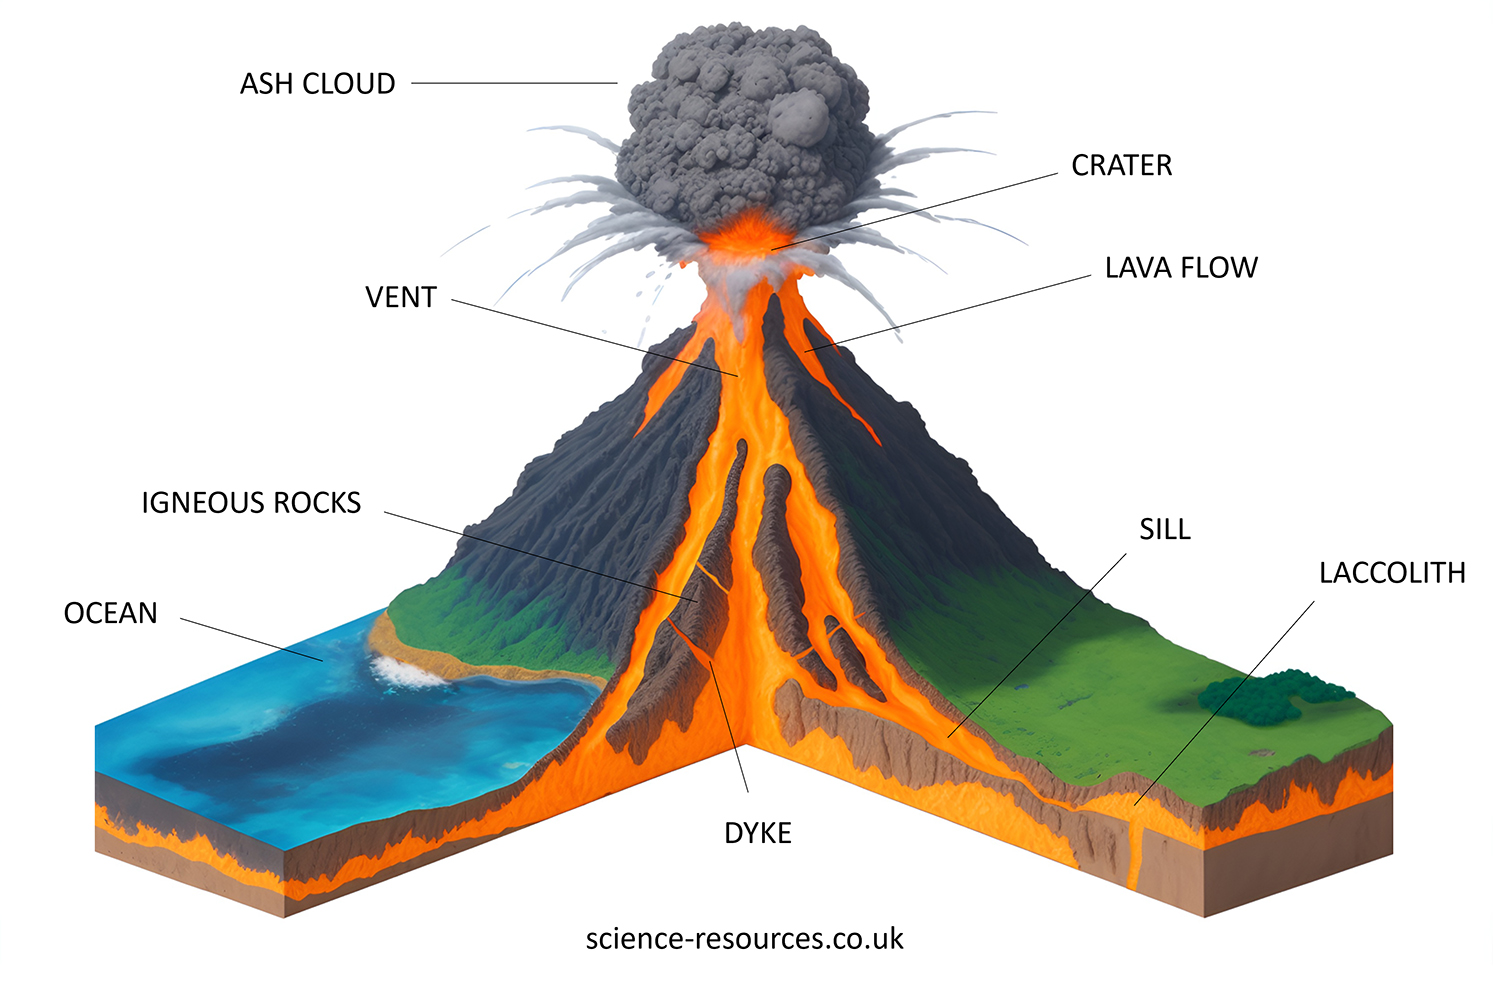 This image is a diagram illustrating the cross-section of a volcano and its surroundings. It labels various parts and features associated with volcanic activity.